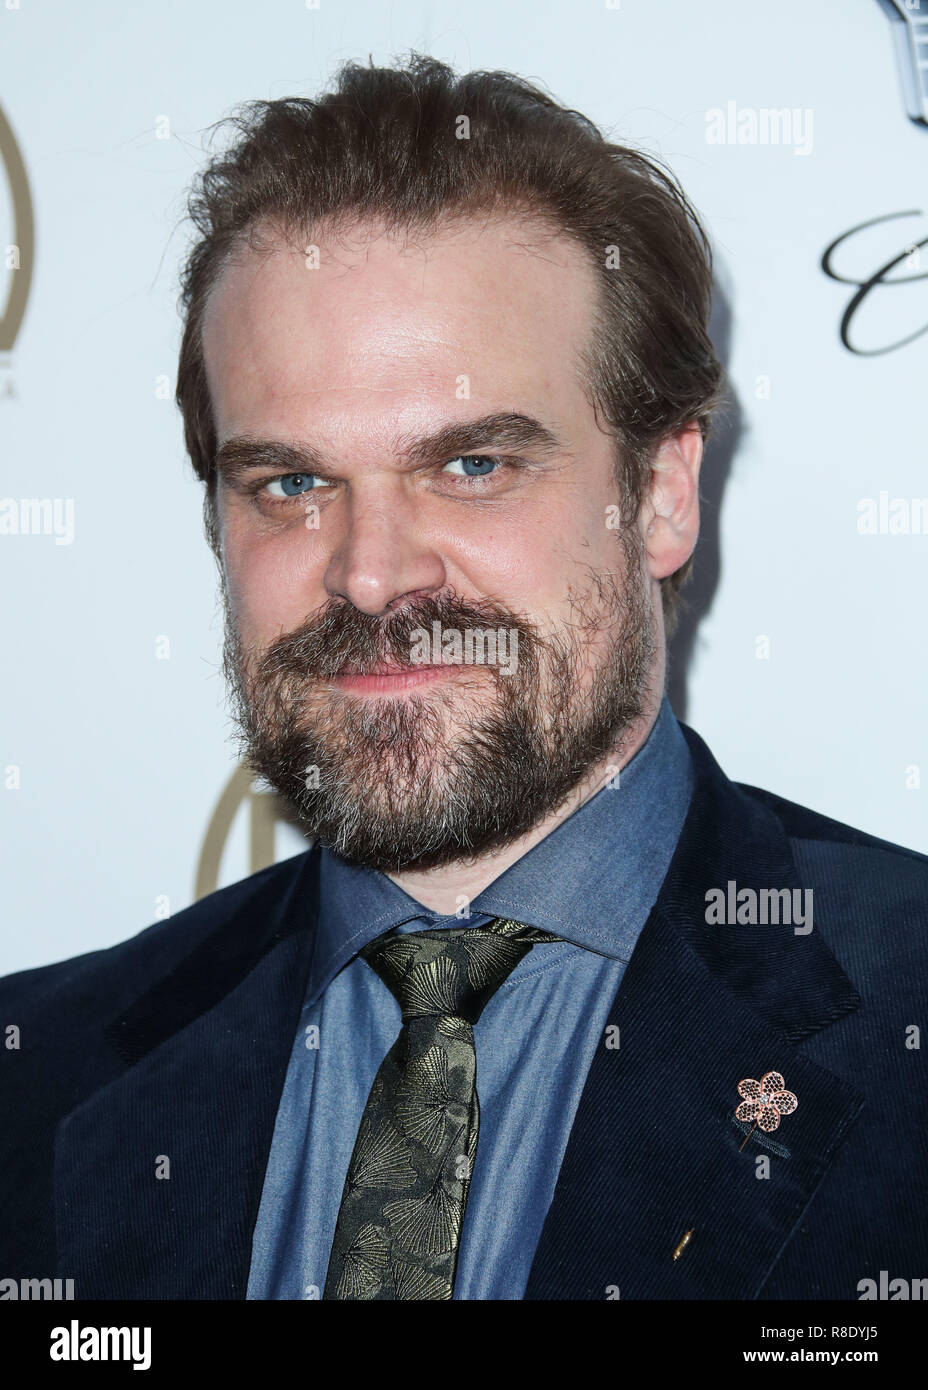 BEVERLY HILLS, LOS ANGELES, CA, USA - JANUARY 20: David Harbour at the 29th Annual Producers Guild Awards held at The Beverly Hilton Hotel on January 20, 2018 in Beverly Hills, Los Angeles, California, United States. (Photo by Xavier Collin/Image Press Agency) Stock Photo